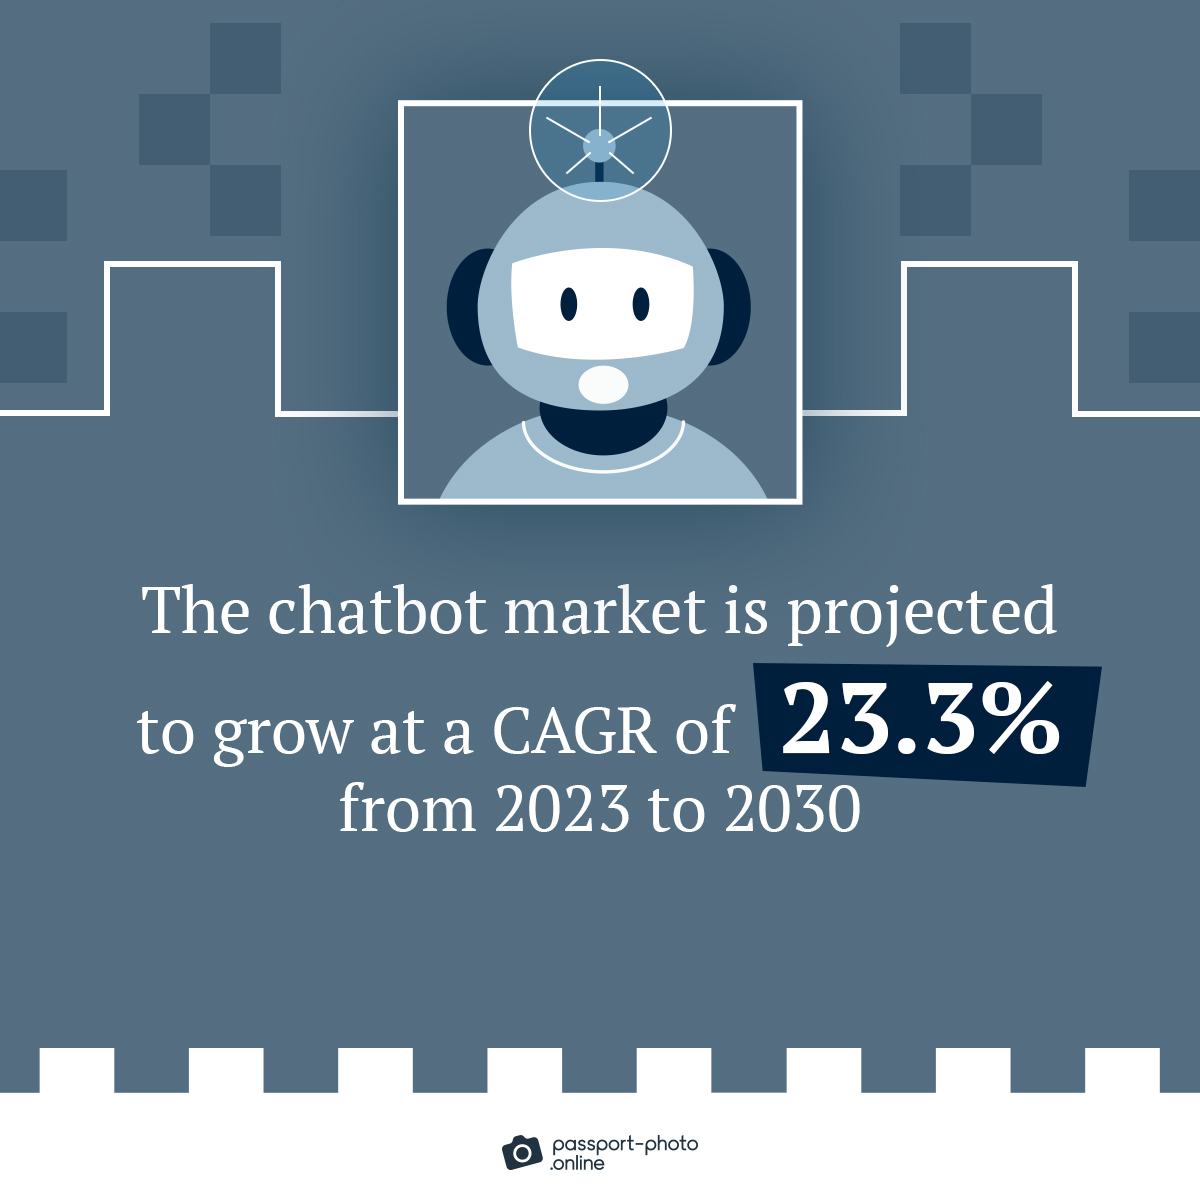 chatbot market will grow at a CAGR of 23.3% from 2023 to 2030